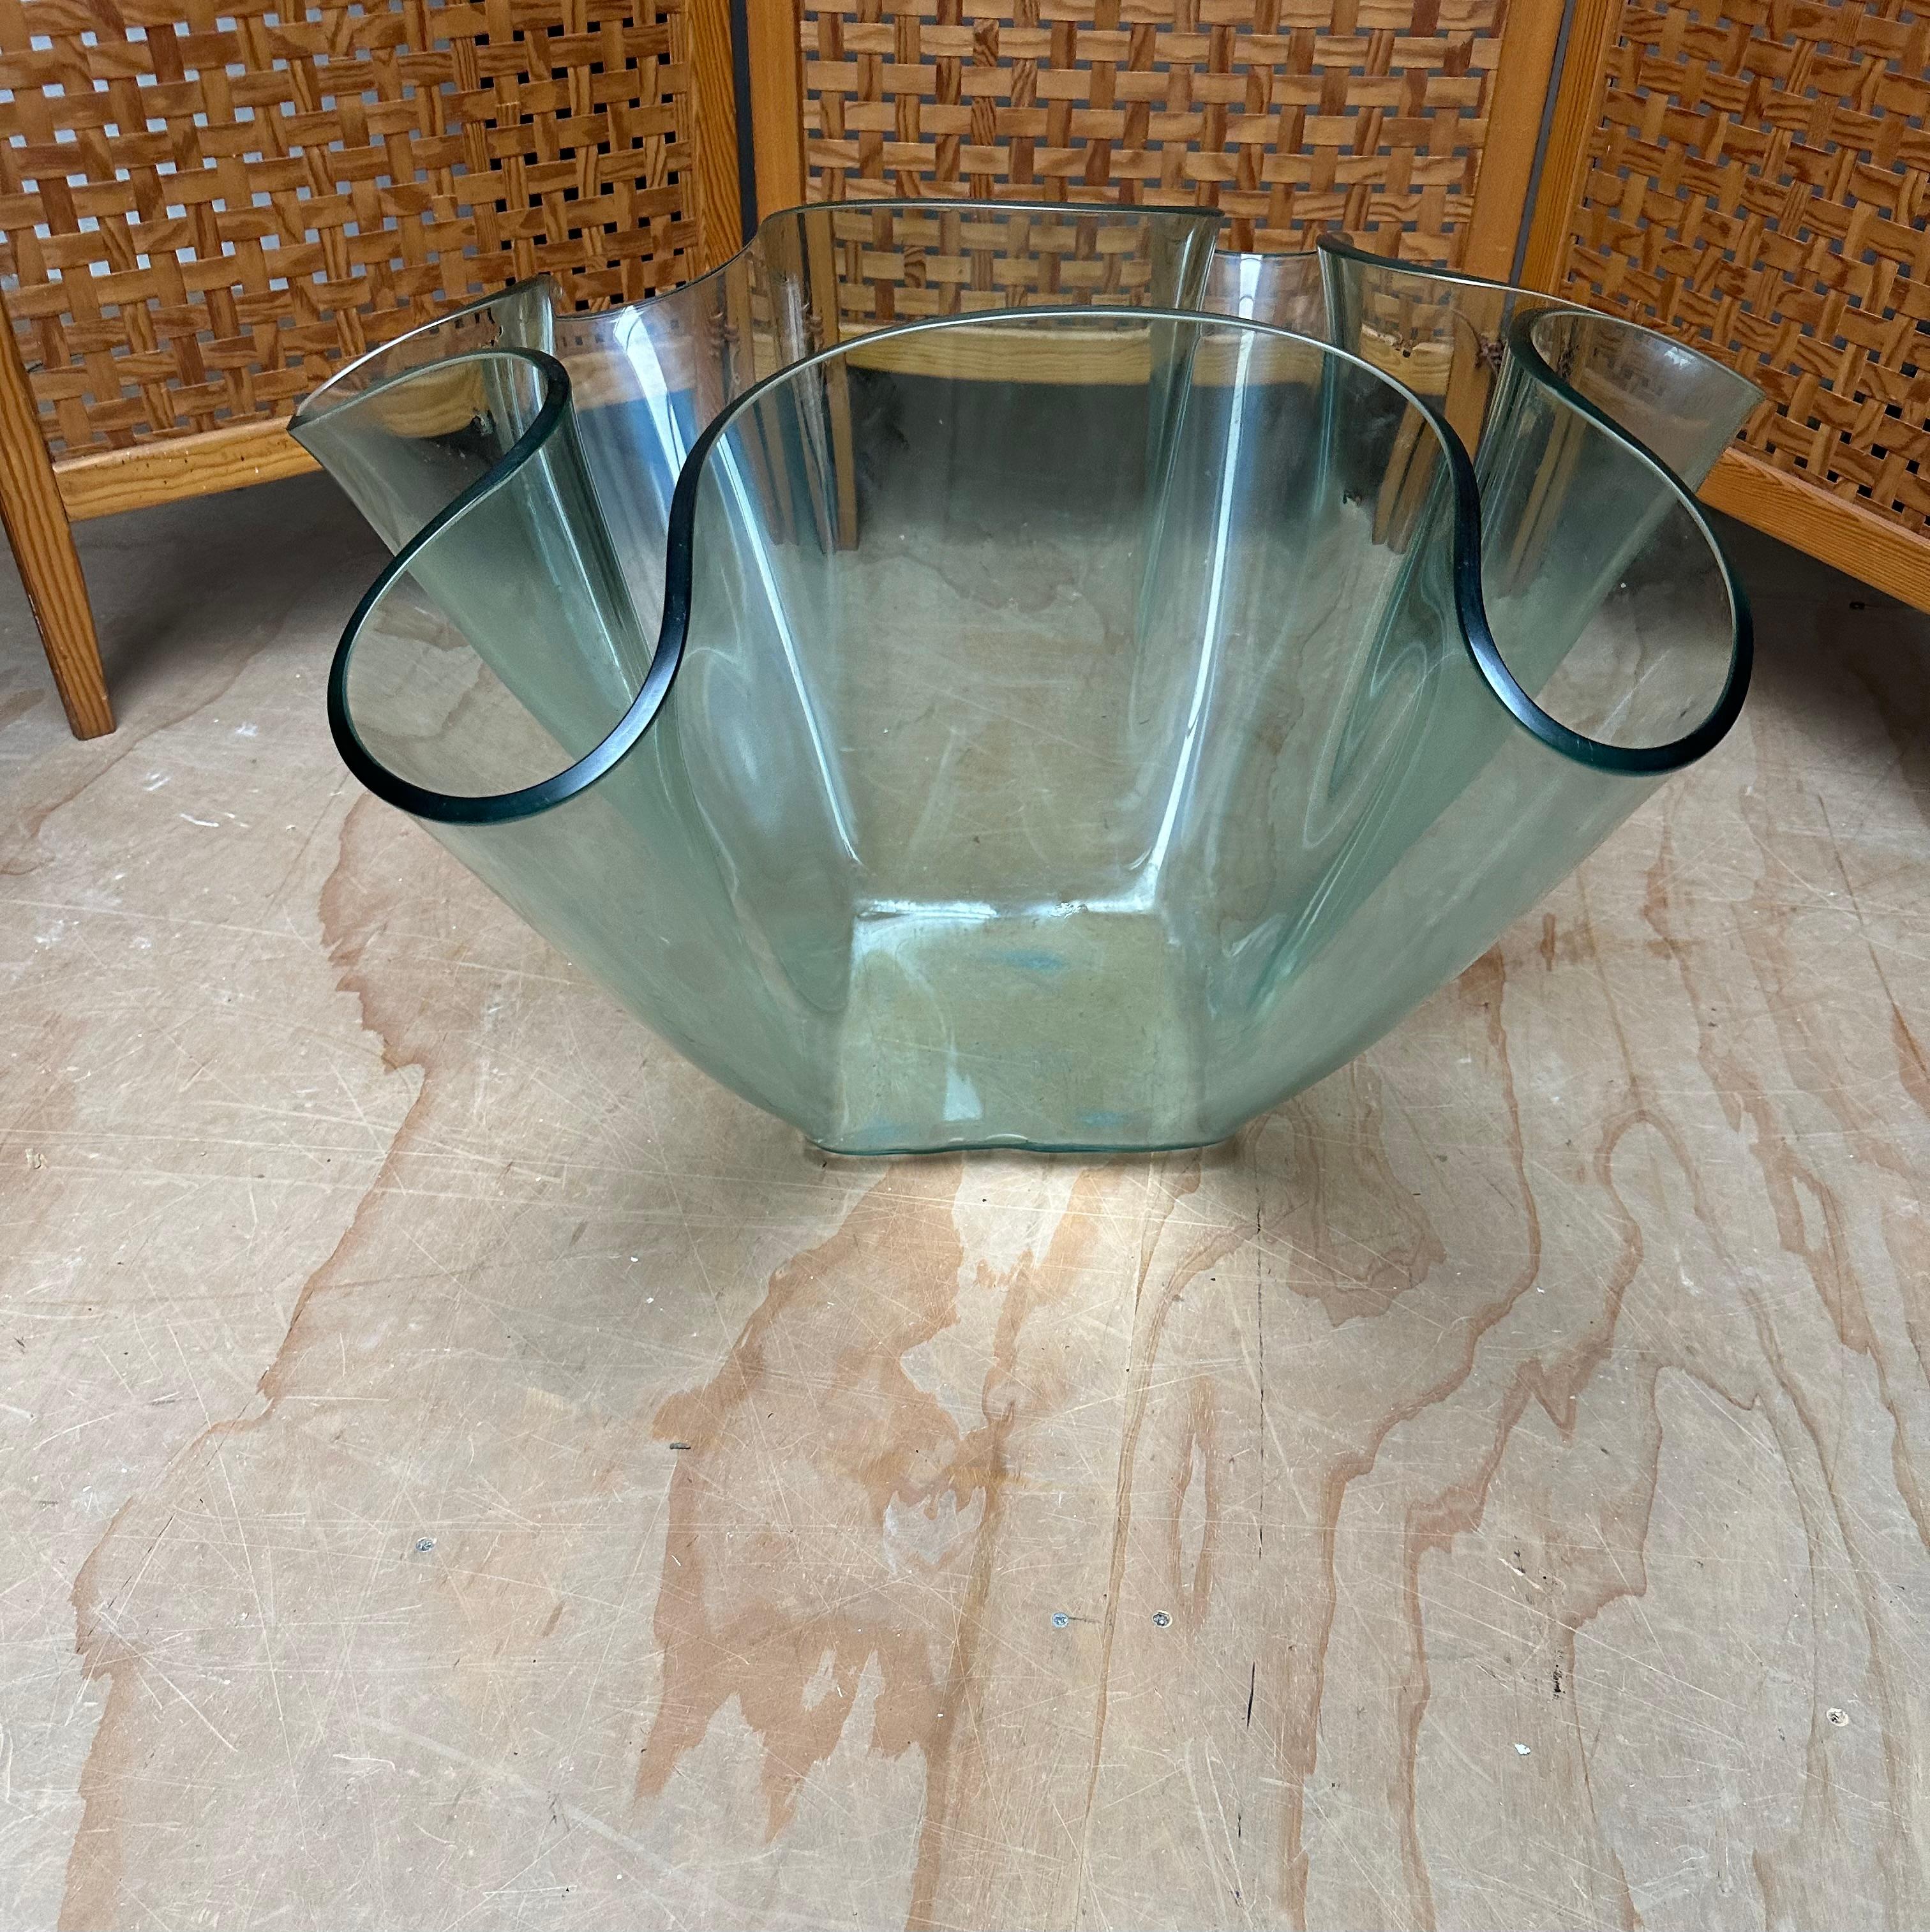 Great condition and all handcrafted thick glass planter or jardiniere, made in Italy.

If you are looking for a truly exclusive and very stylish, extra large vase then this avantgardistic Italian work of beauty from the 1980s could be flying your